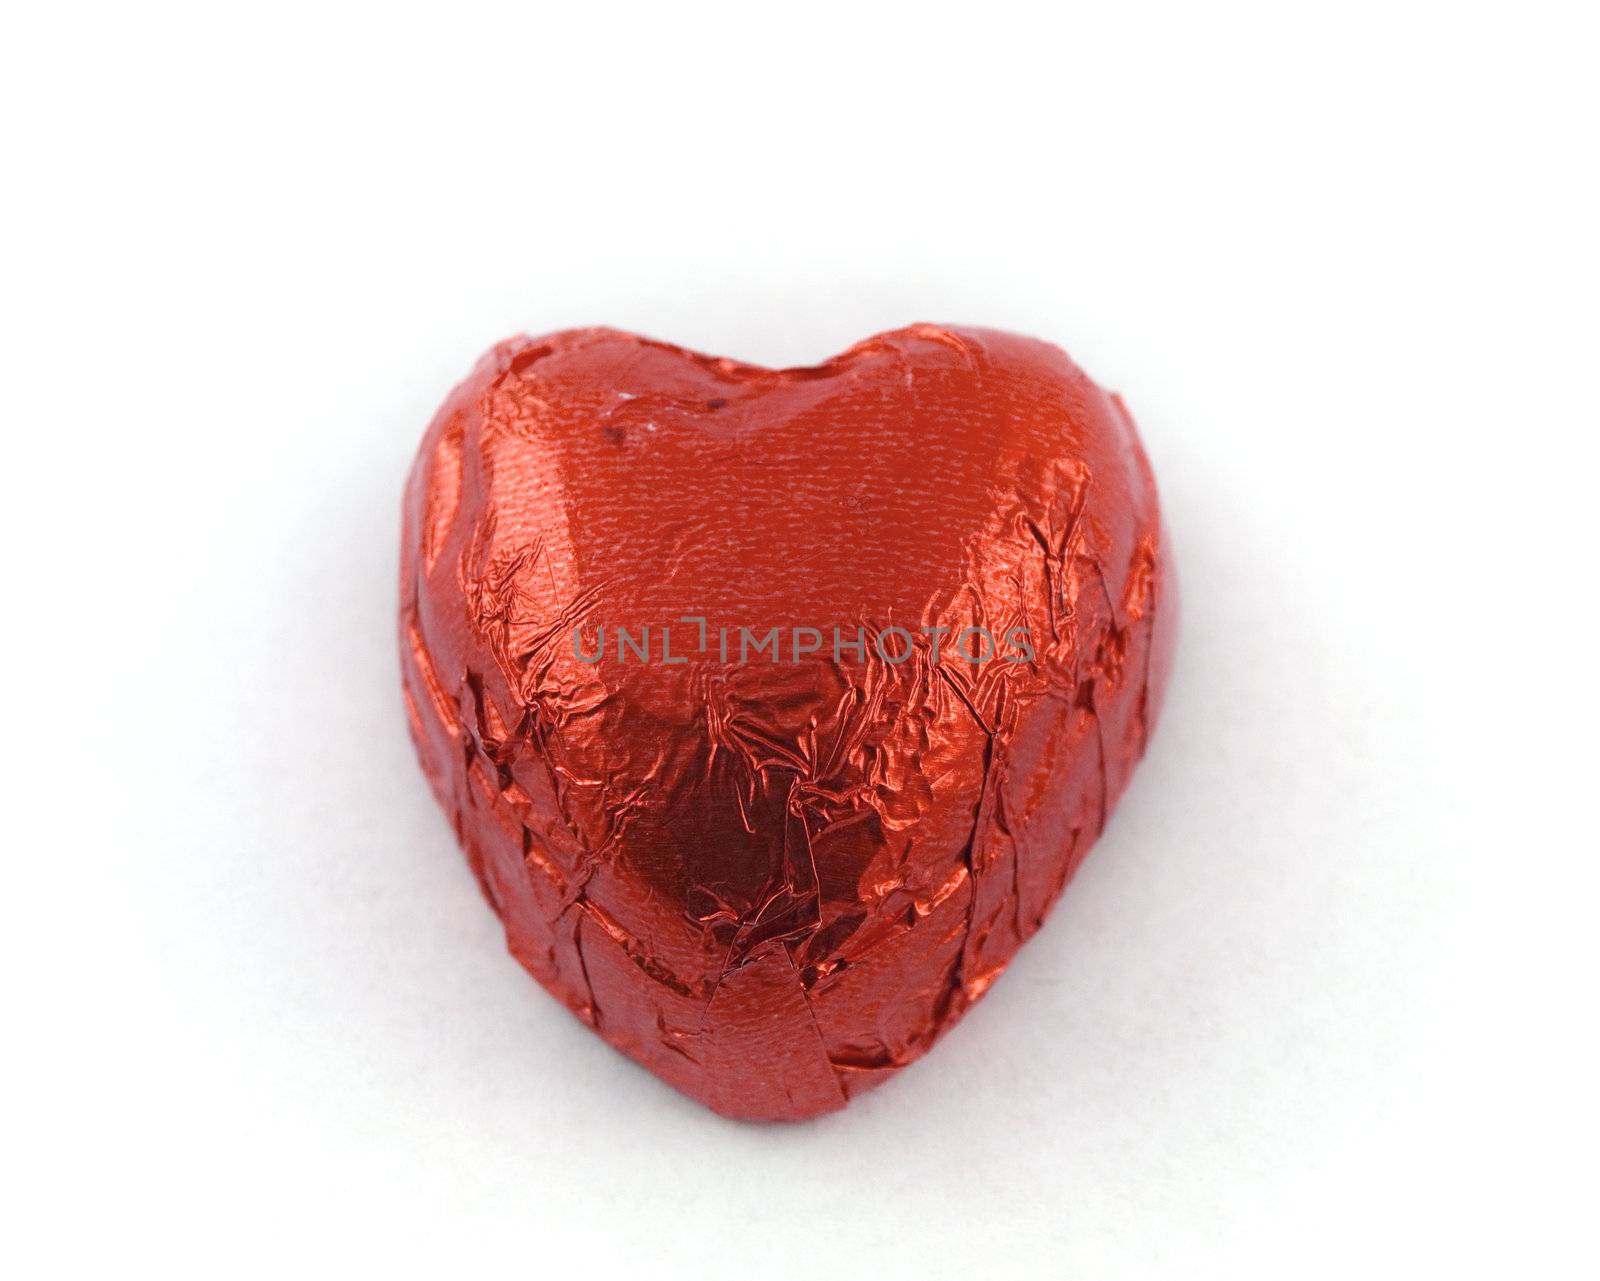 Heart Shaped Chocolate in Red Tin Foil